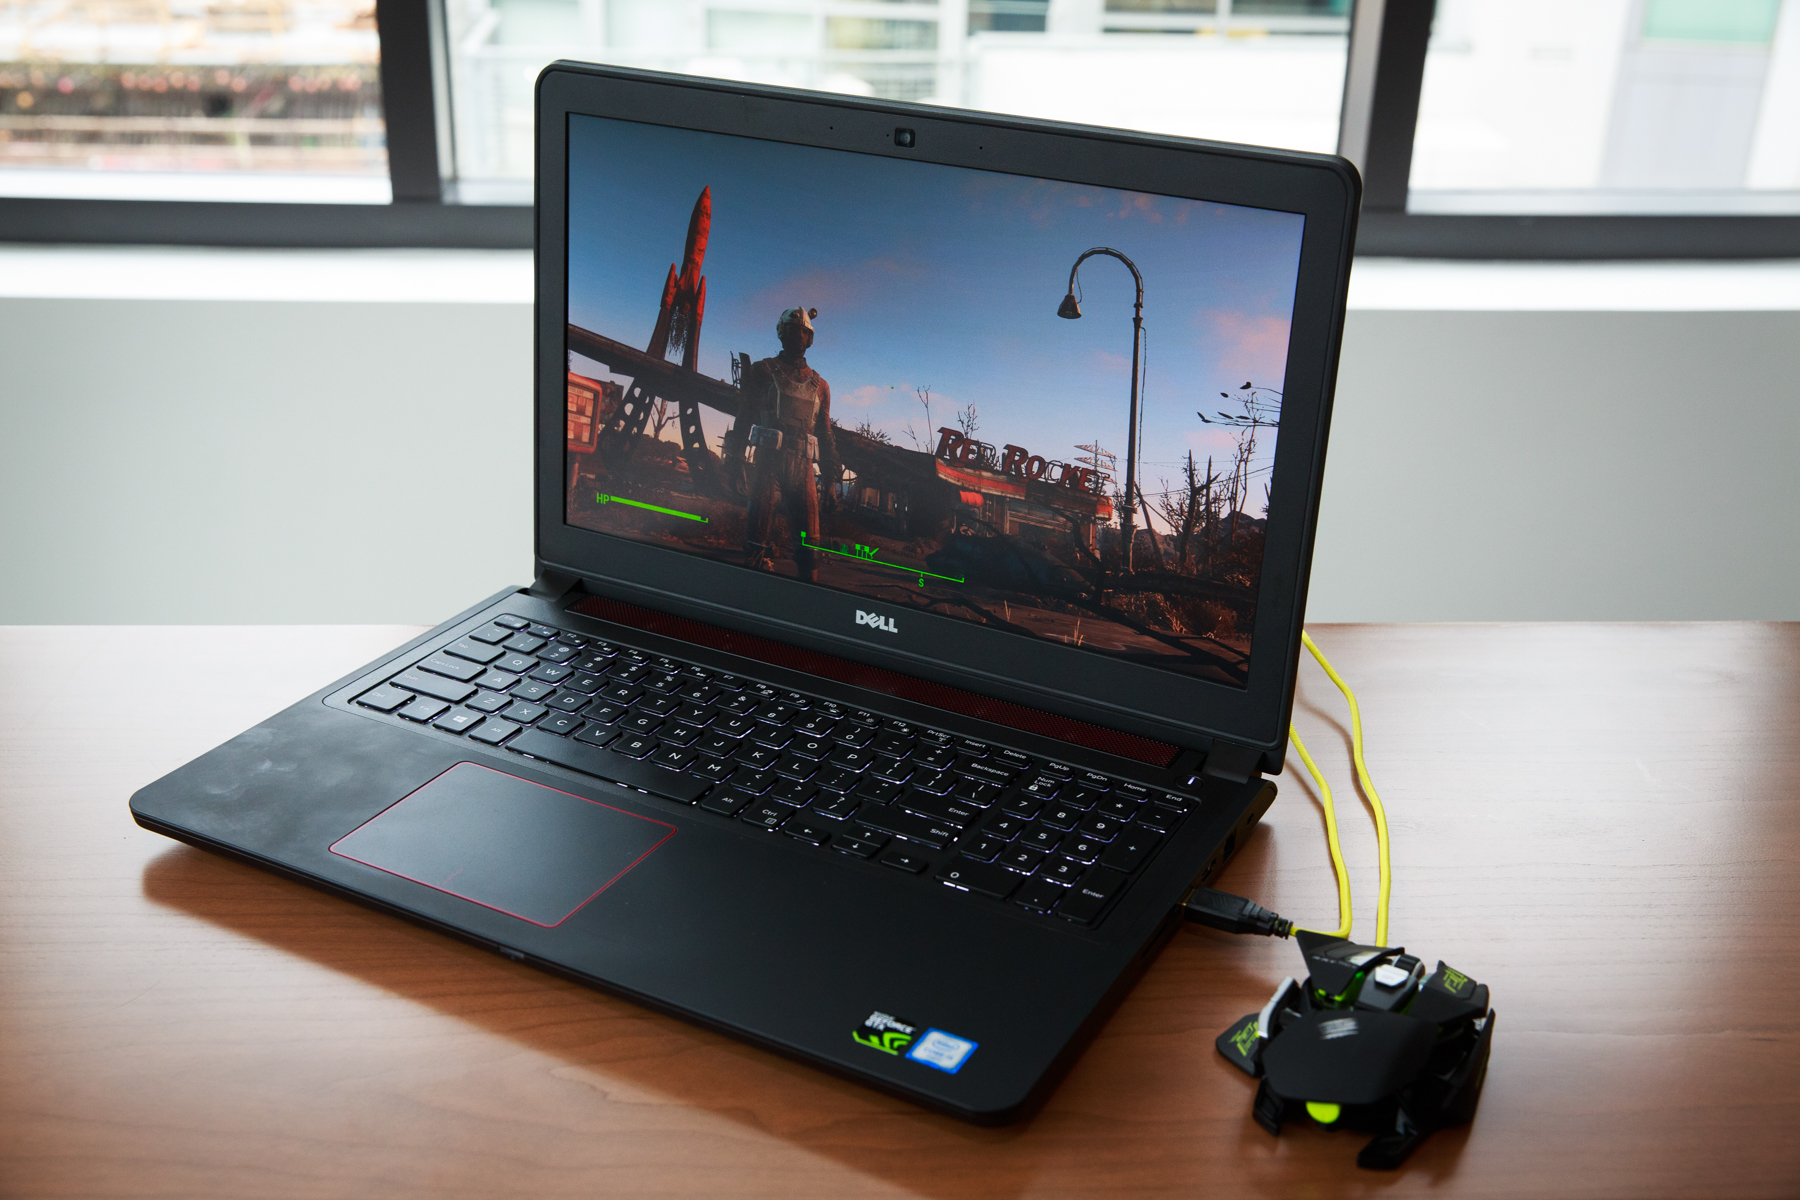 Dell Inspiron 15 7000 (2016) review: This $800 laptop can play any PC game  - CNET